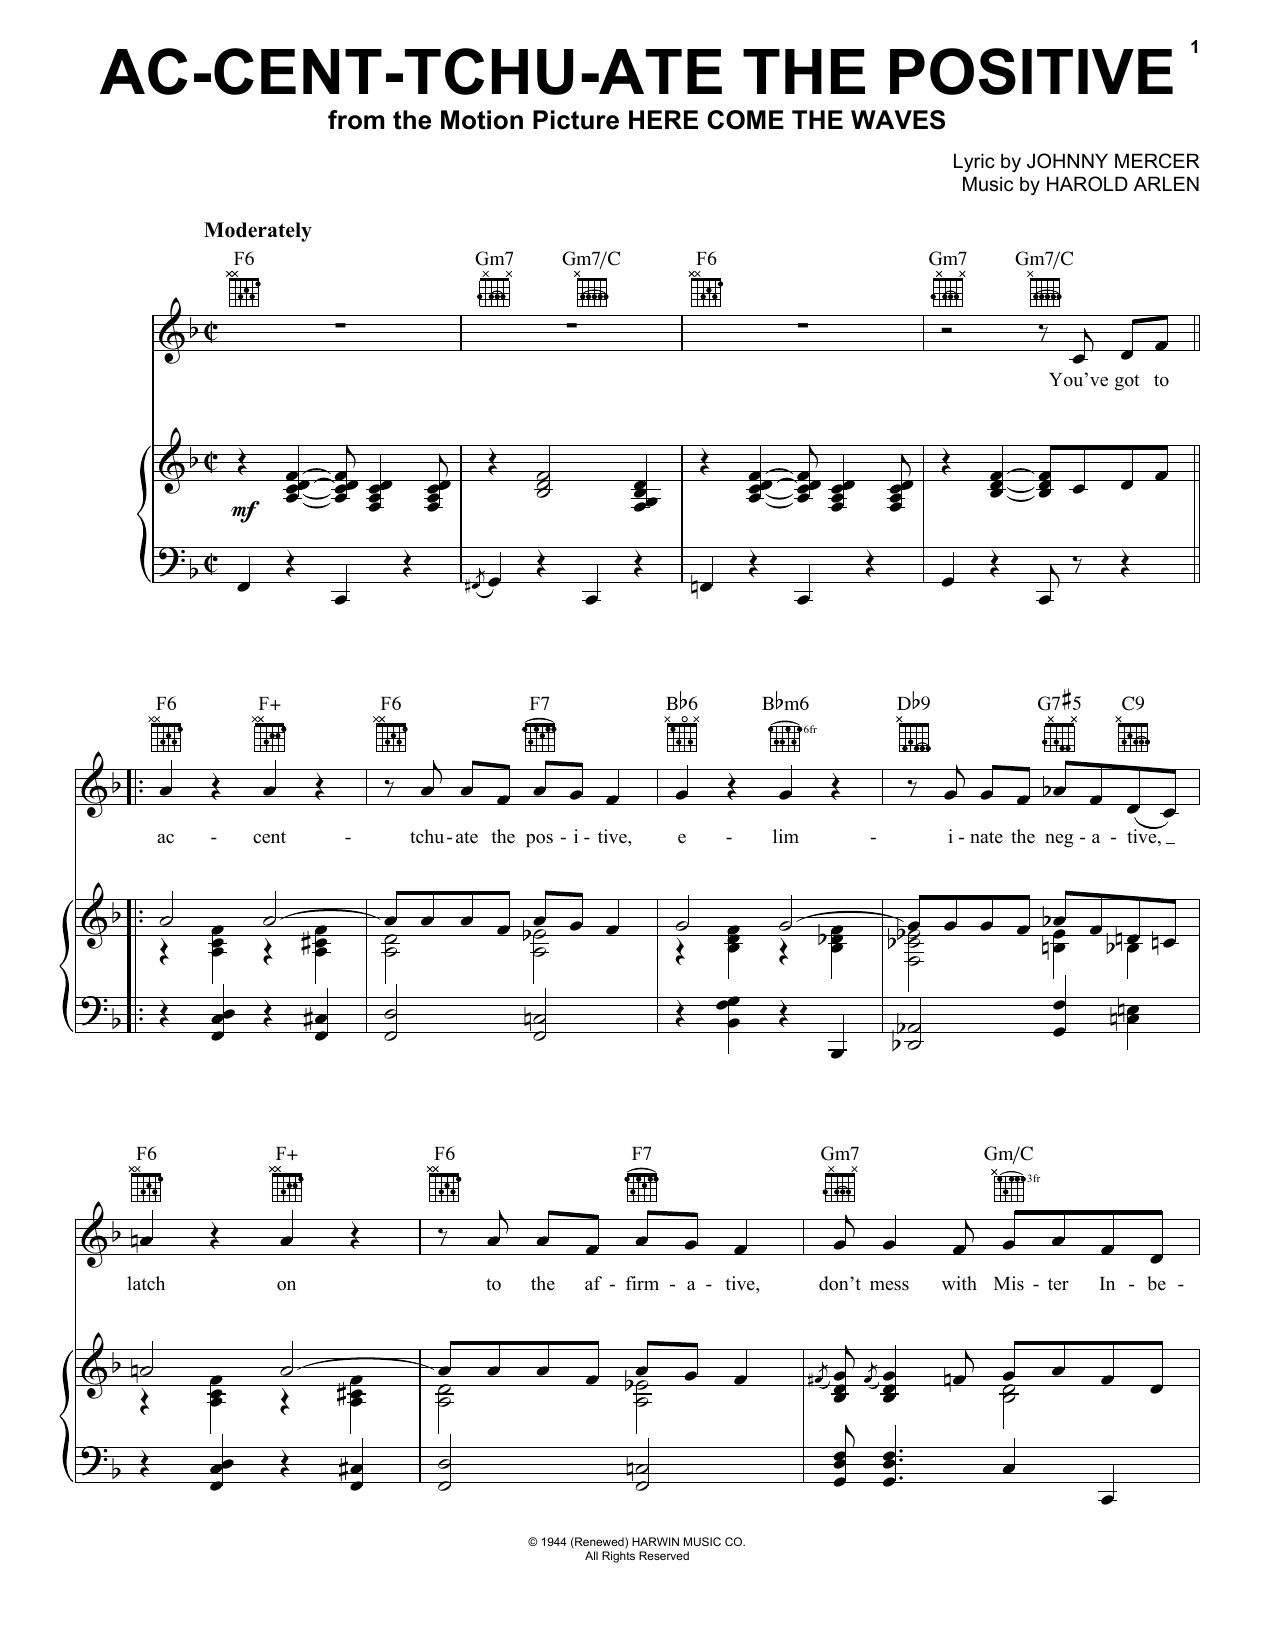 Download Bing Crosby Ac-cent-tchu-ate The Positive Sheet Music